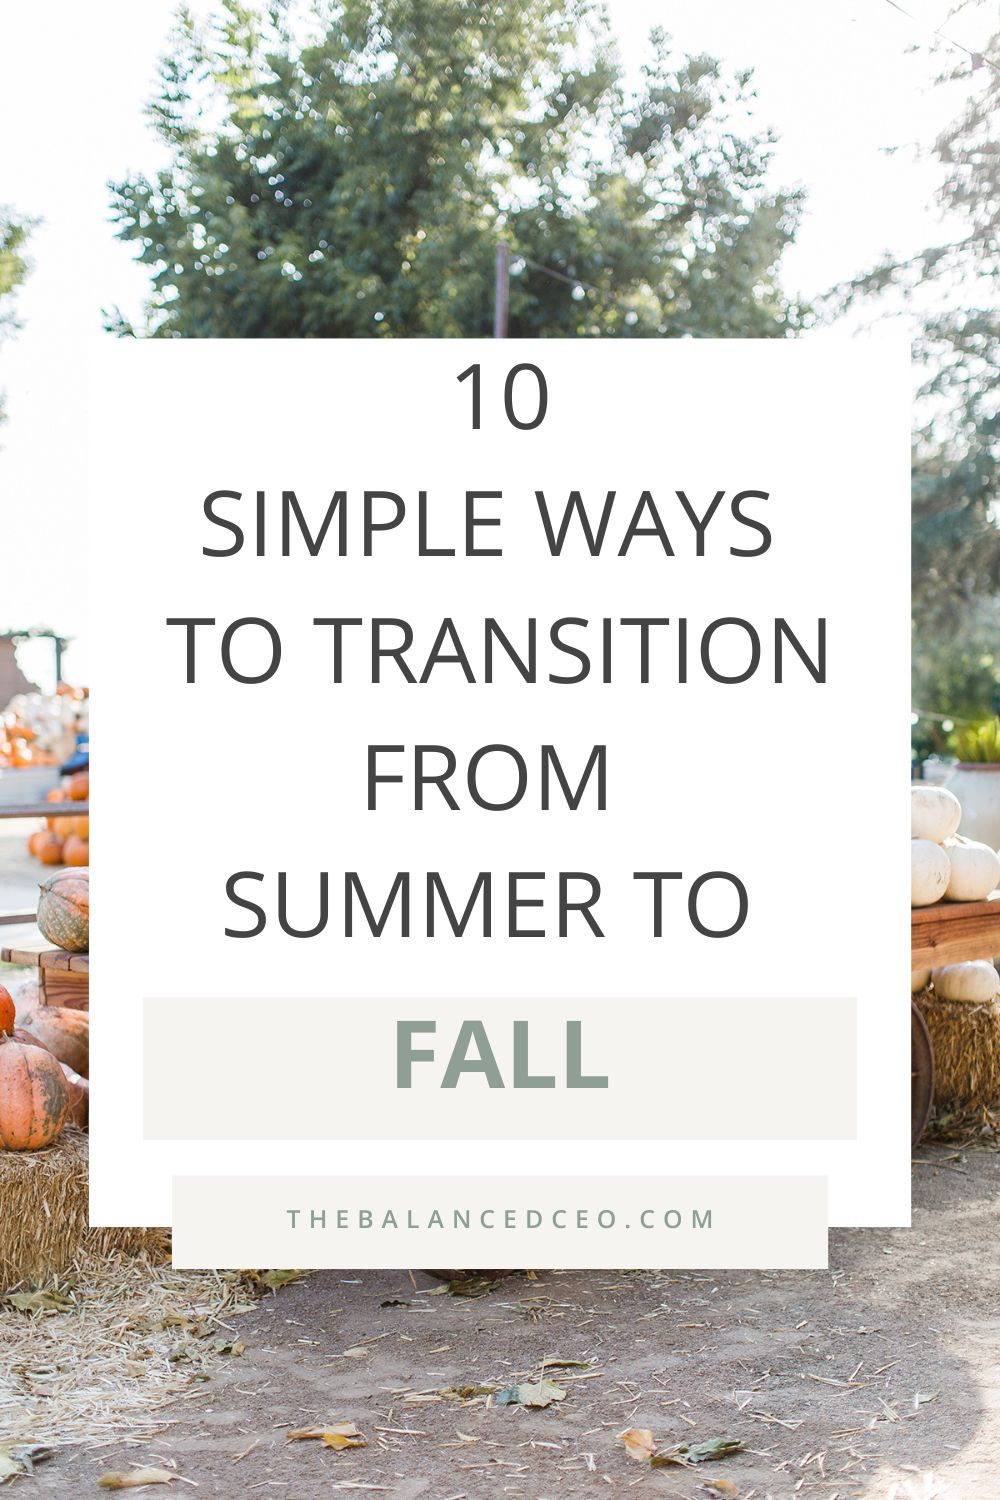 10 Simple Ways to Mindfully Transition From Summer to Fall